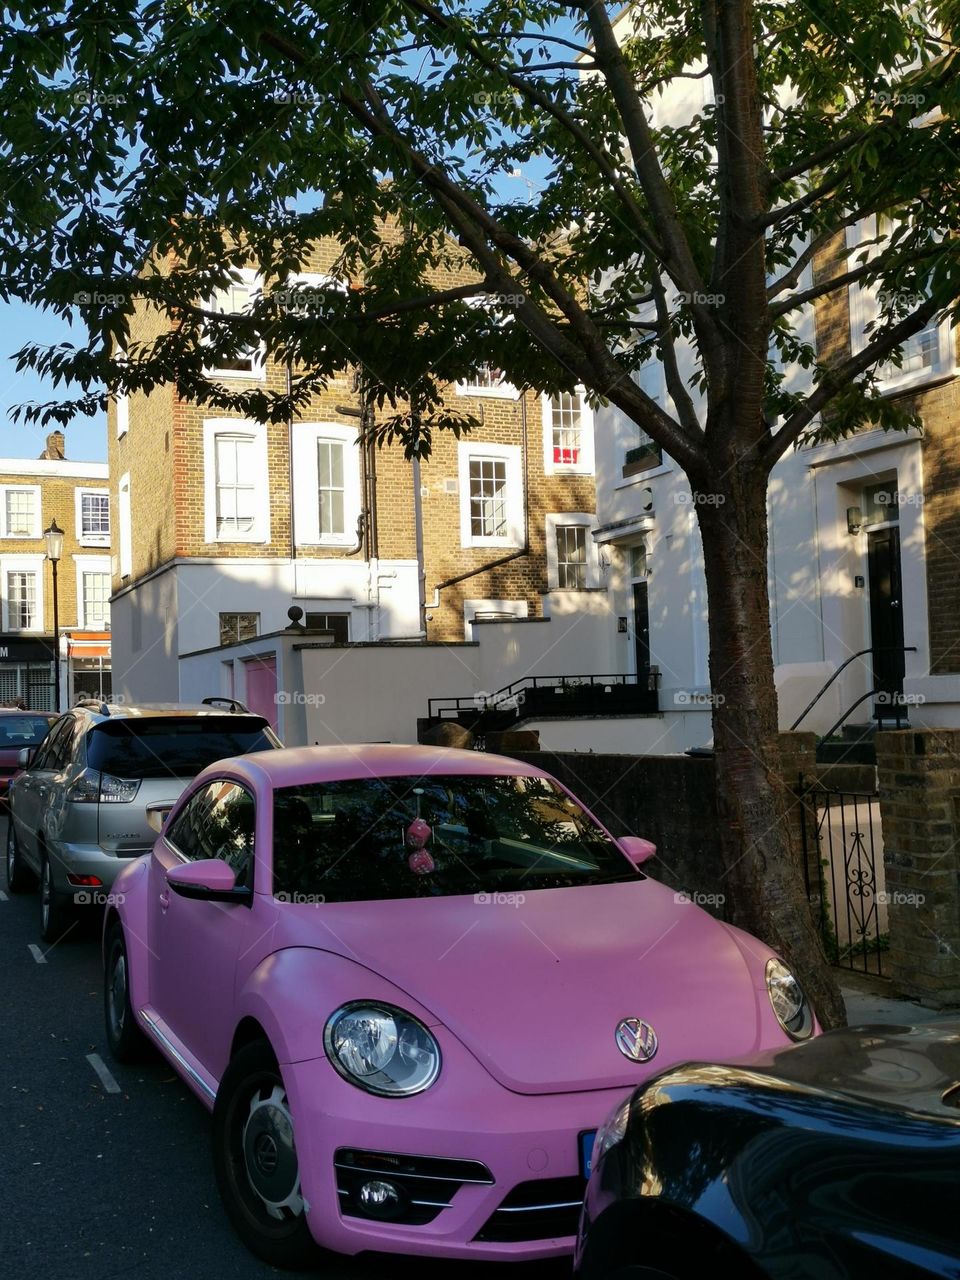 Car with soul. Pink car. London. Street photo.